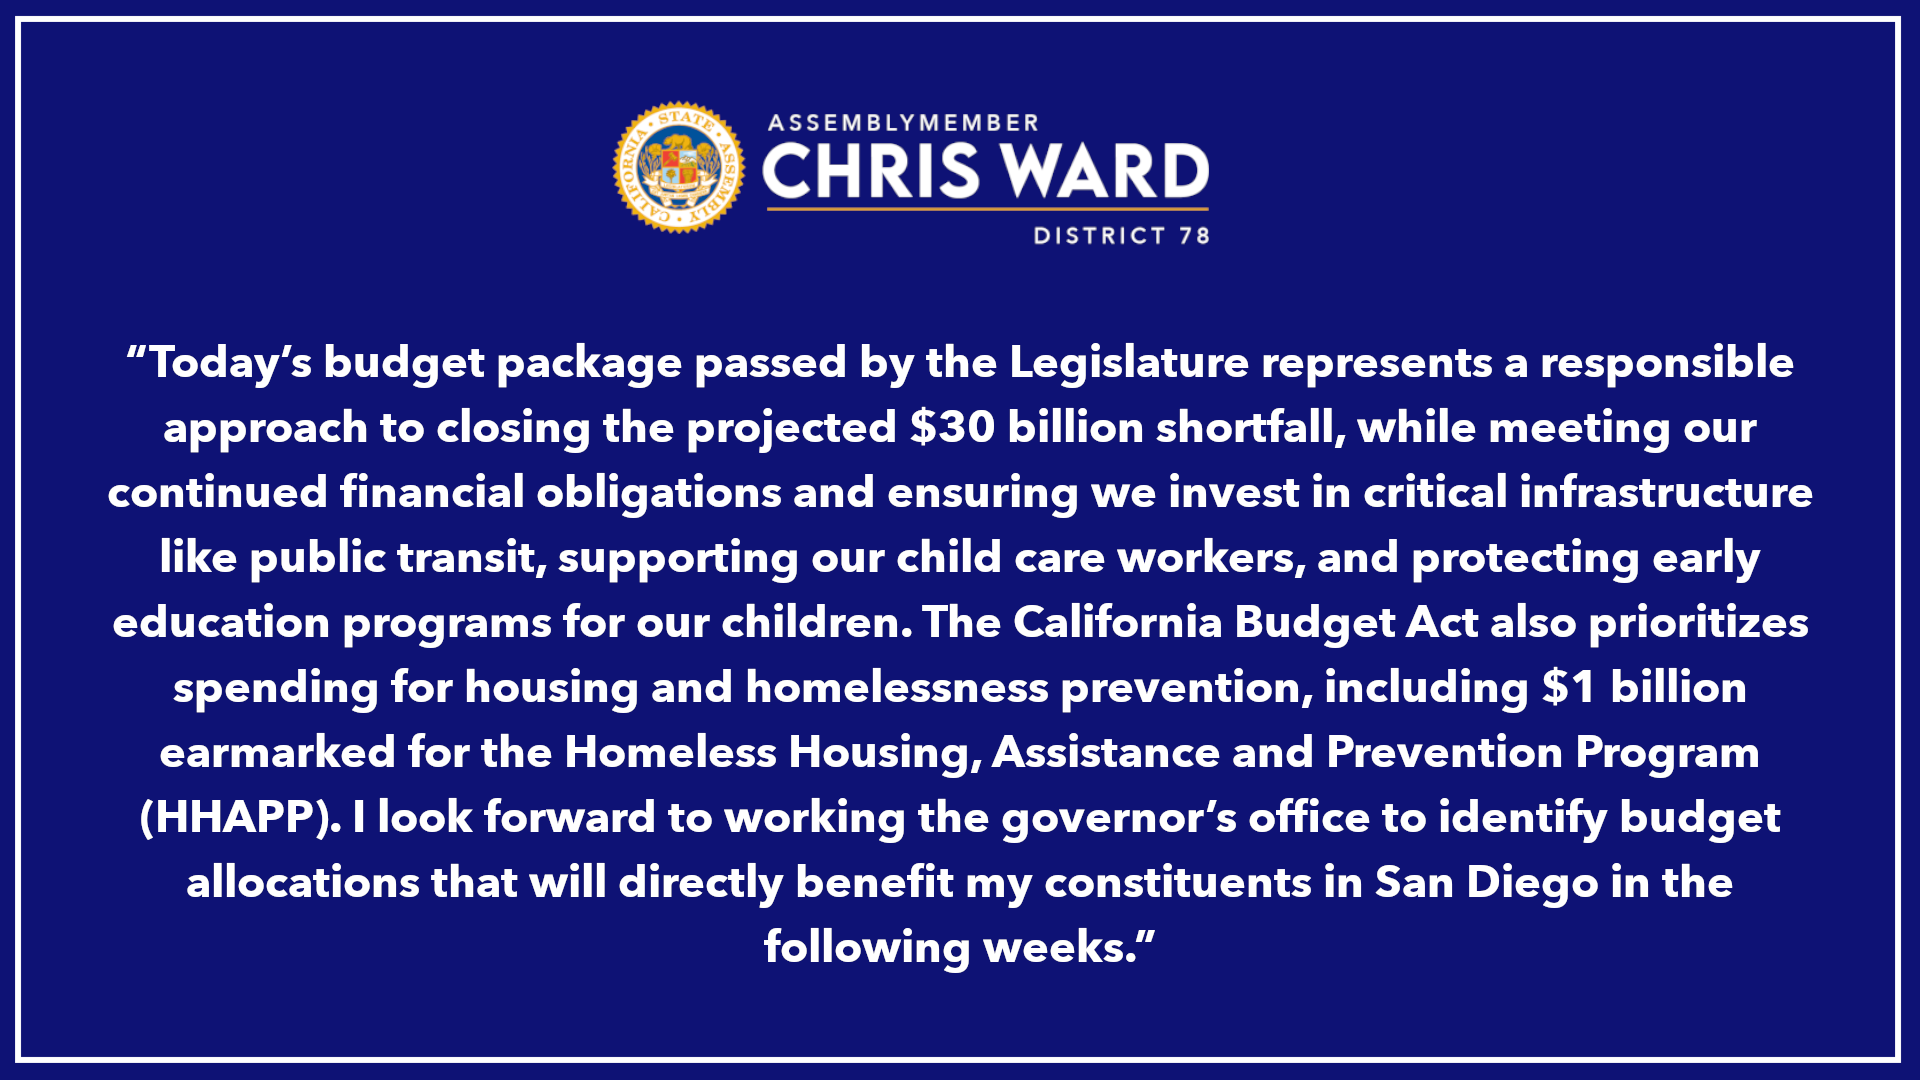 Assemblymember Ward Statement on the Legislature Passing the California Budget Act